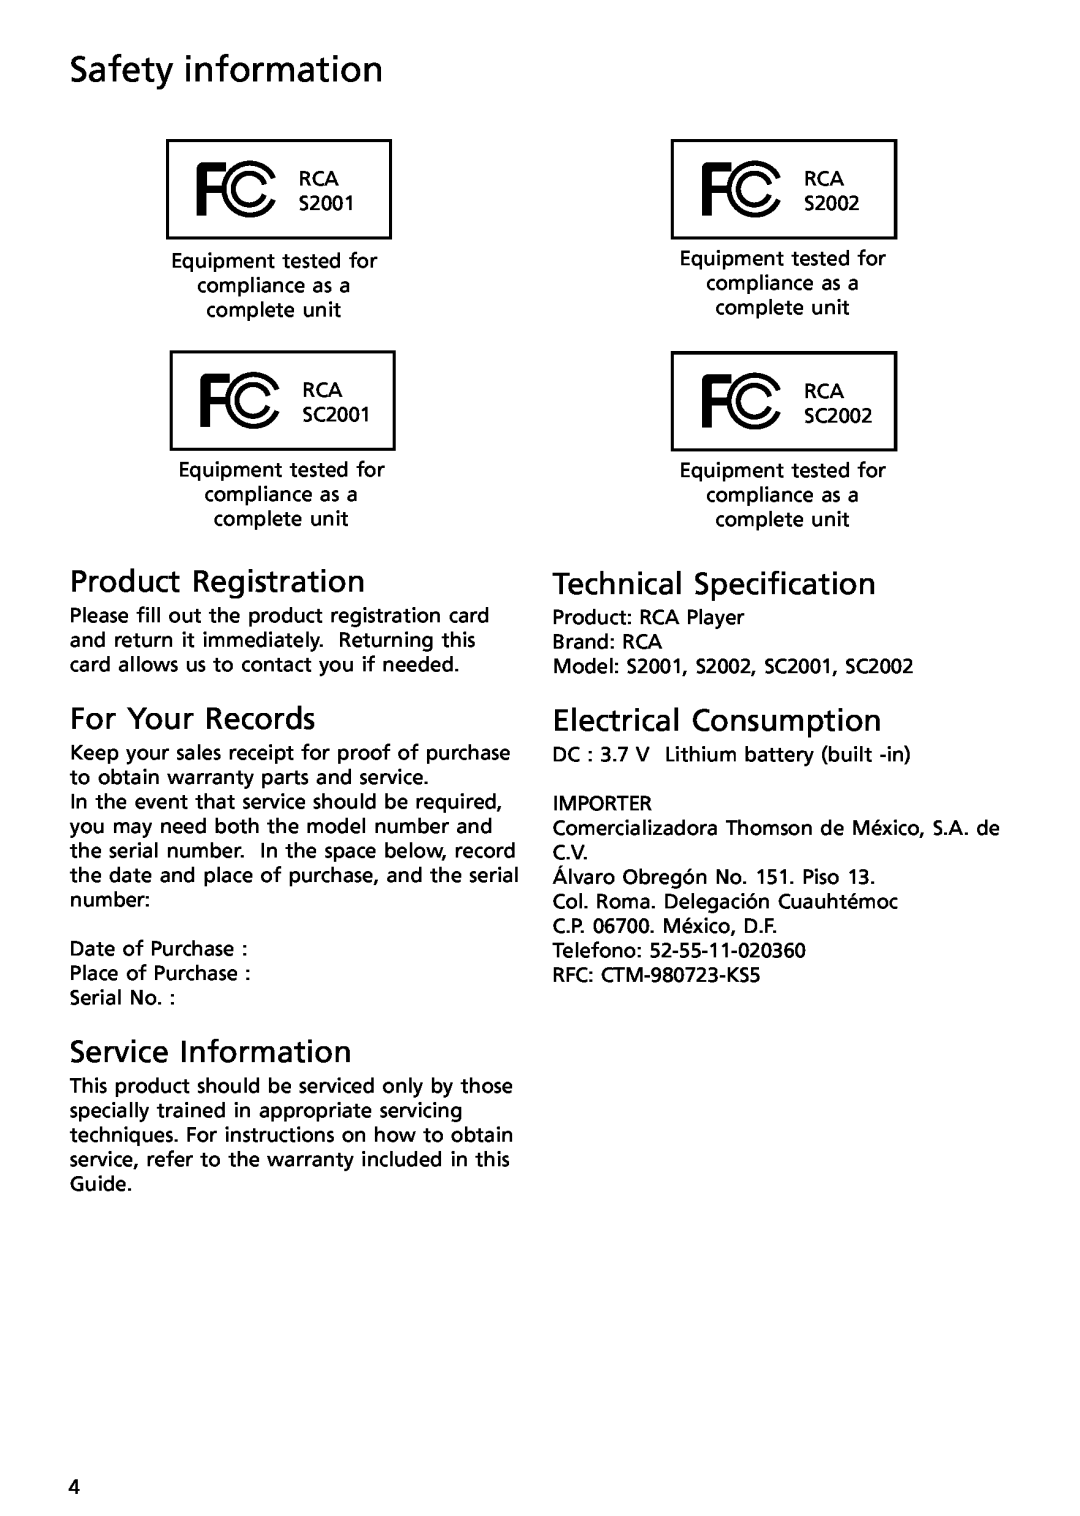 RCA SC2002 Product Registration, Technical Specification, For Your Records, Service Information, Electrical Consumption 